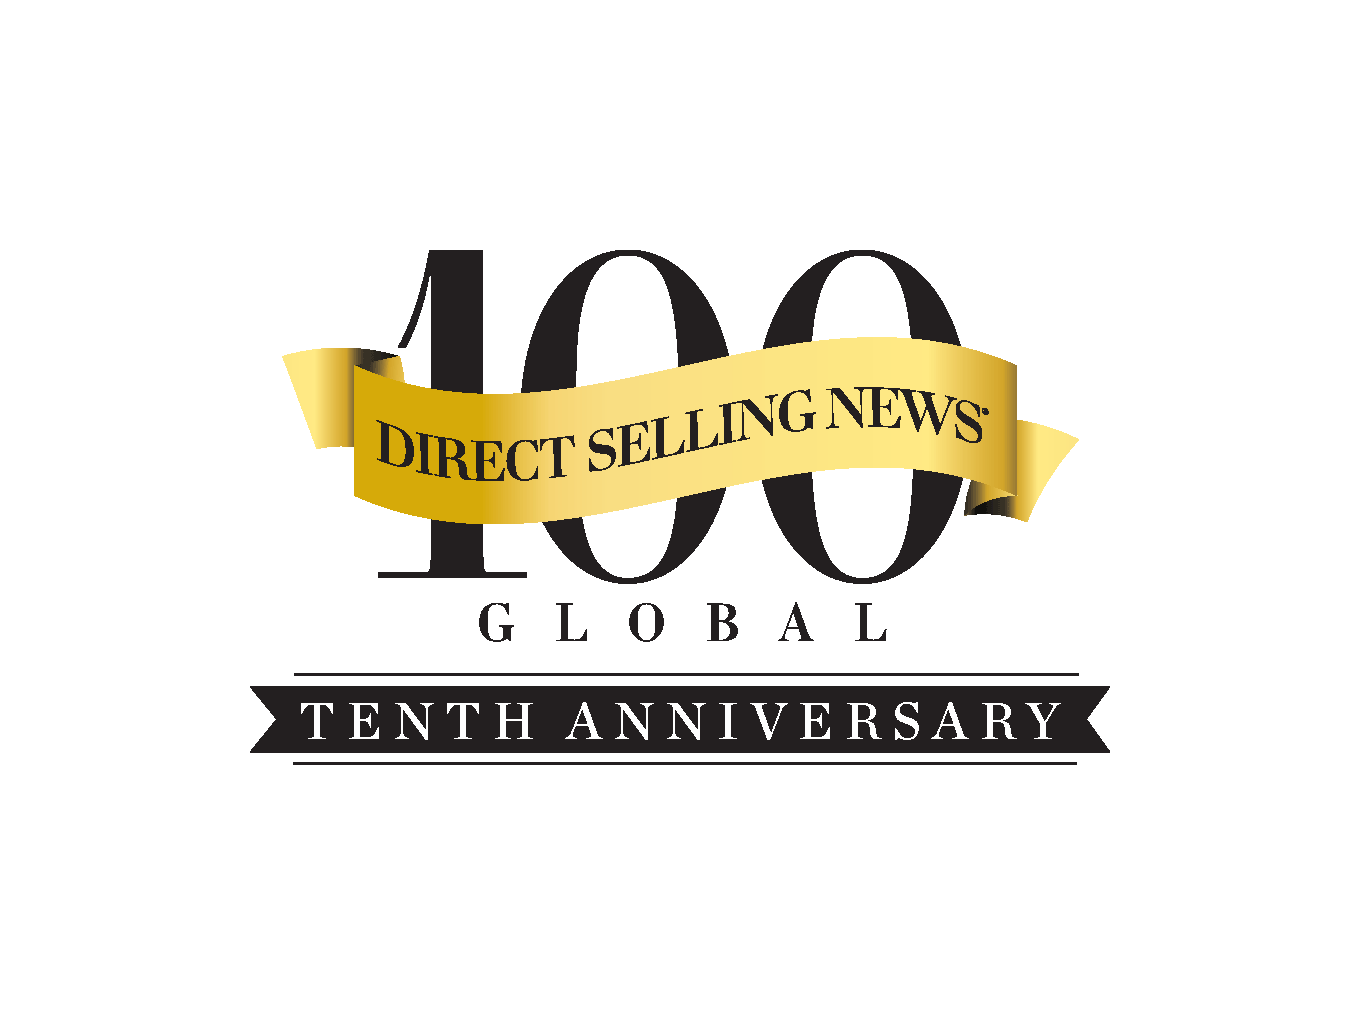 2009 DSN Global 100: The Top Direct Selling Companies in the World